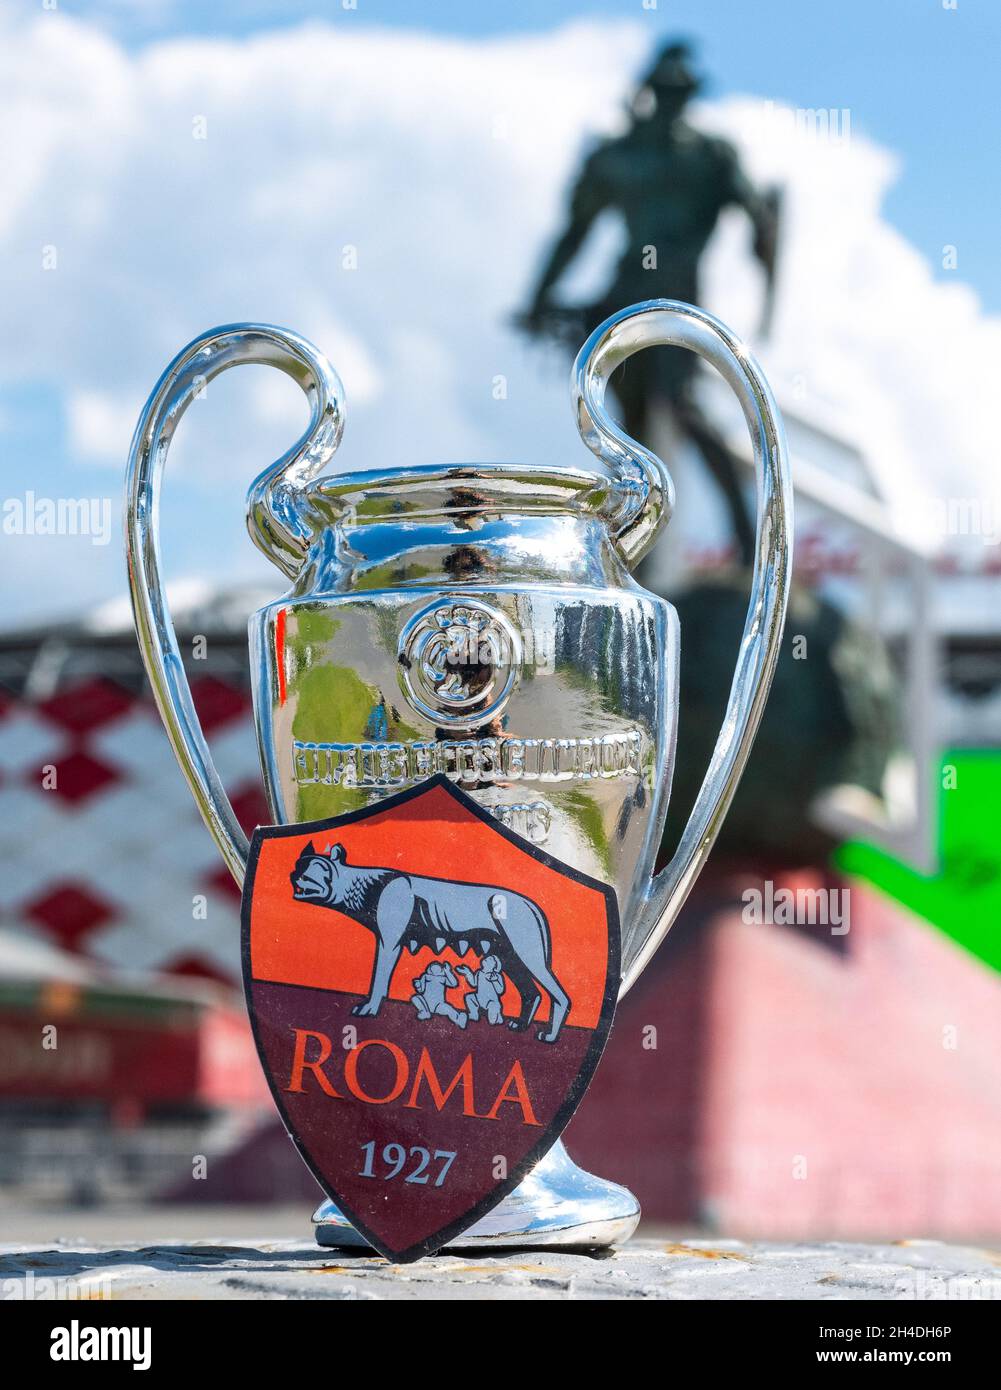 June 14, 2021, Rome, Italy. A.S. Football Club emblem Roma and the UEFA  Champions League Cup against the backdrop of a modern stadium Stock Photo -  Alamy